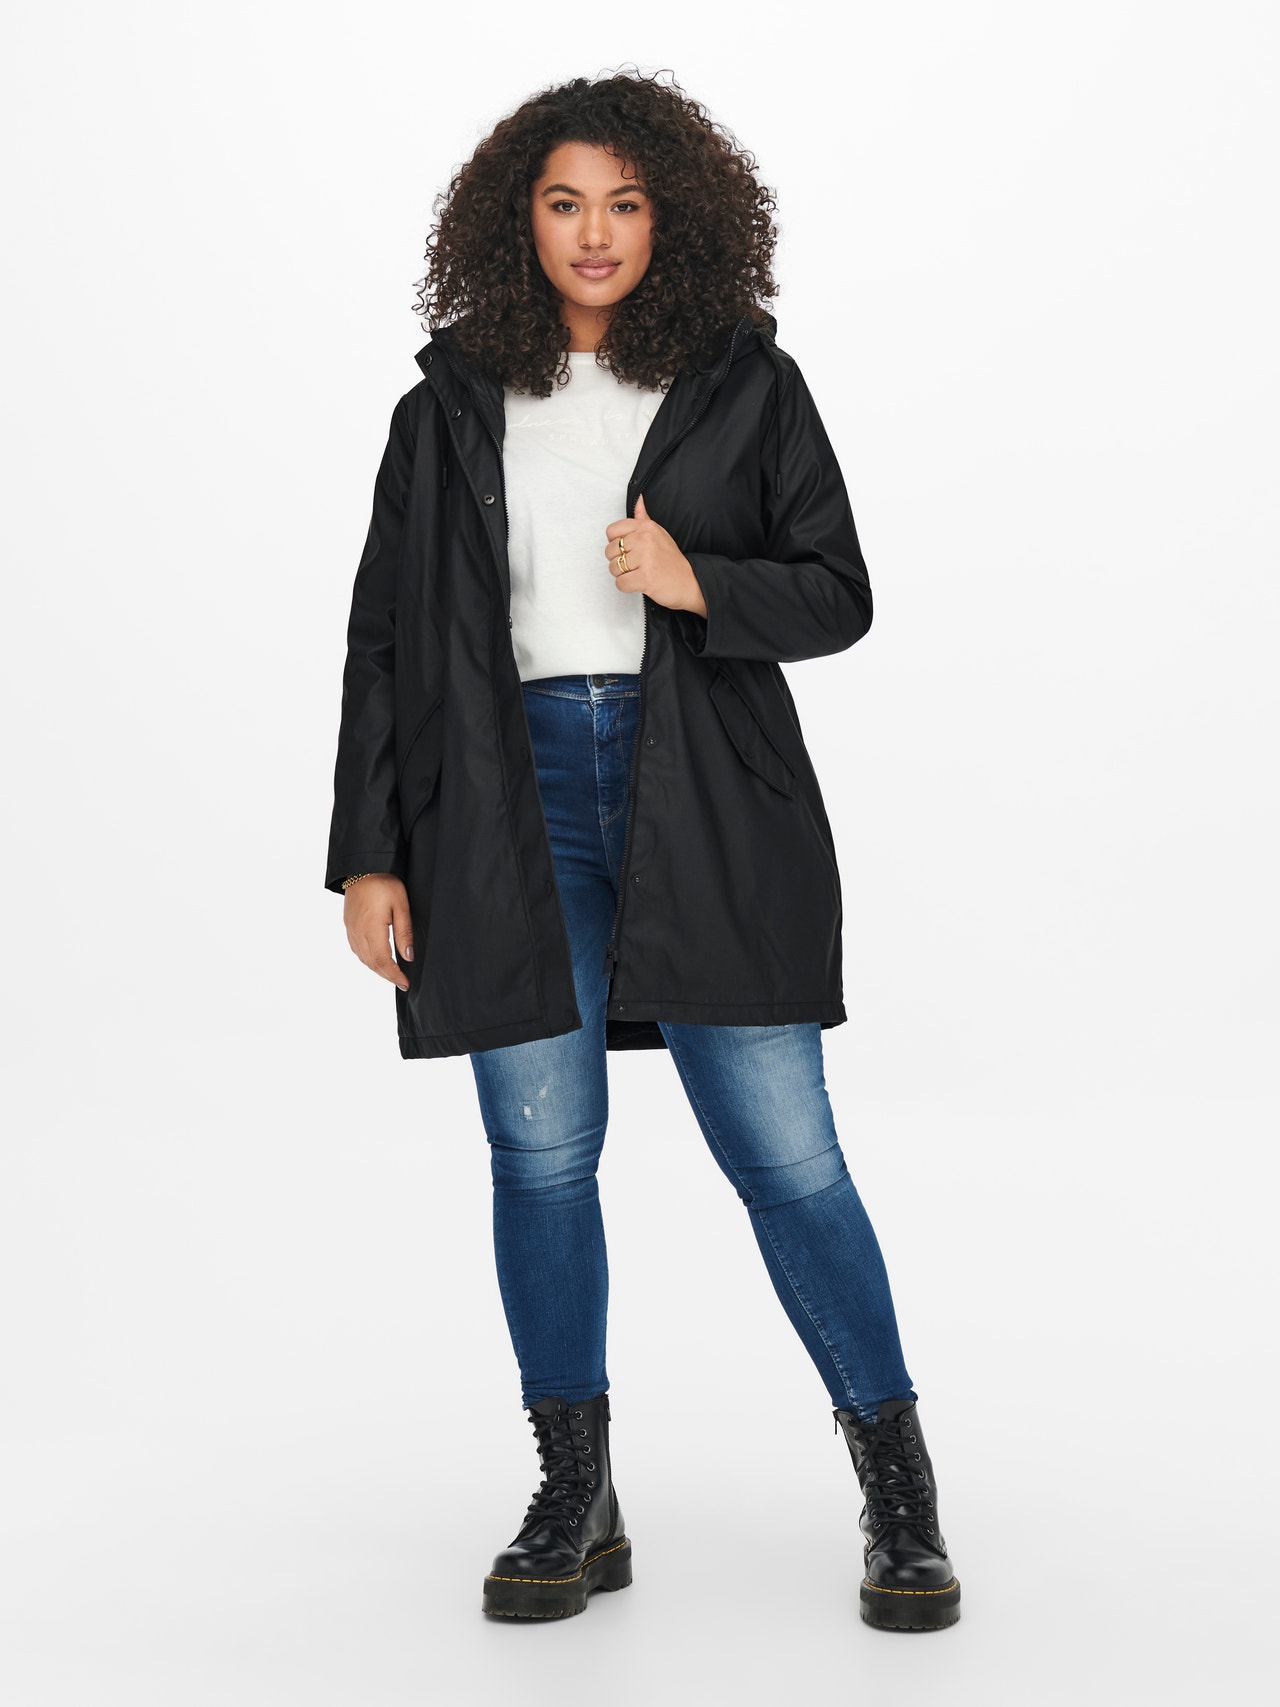 ONLY Hood with teddy lining Coat -Black - 15244948